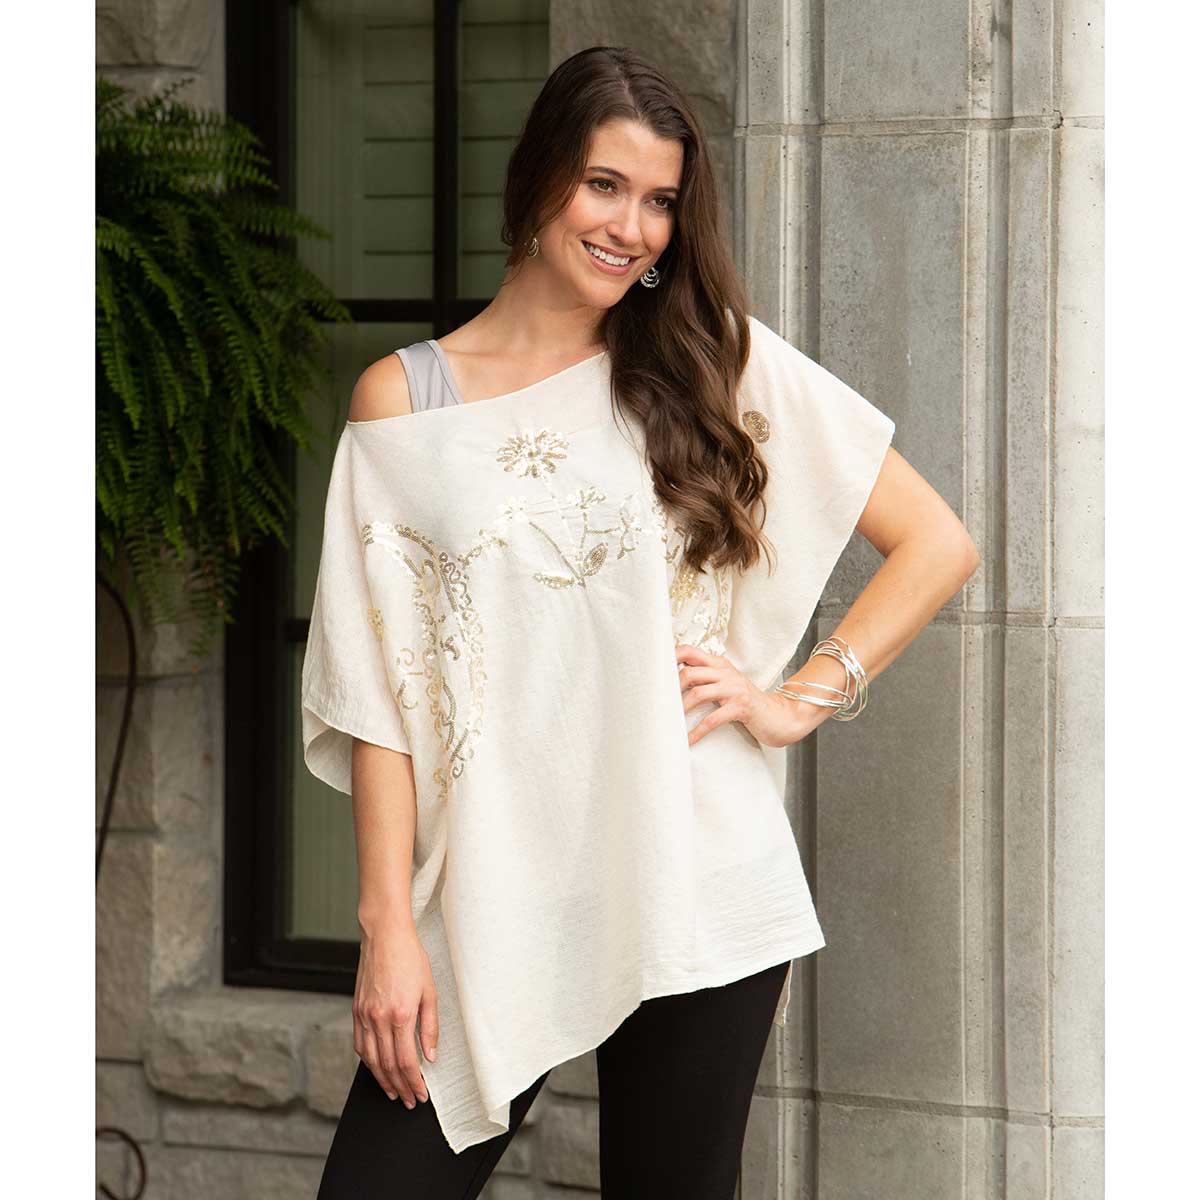 Cream Tunic with Gold Sequins 34"x28" 50sp